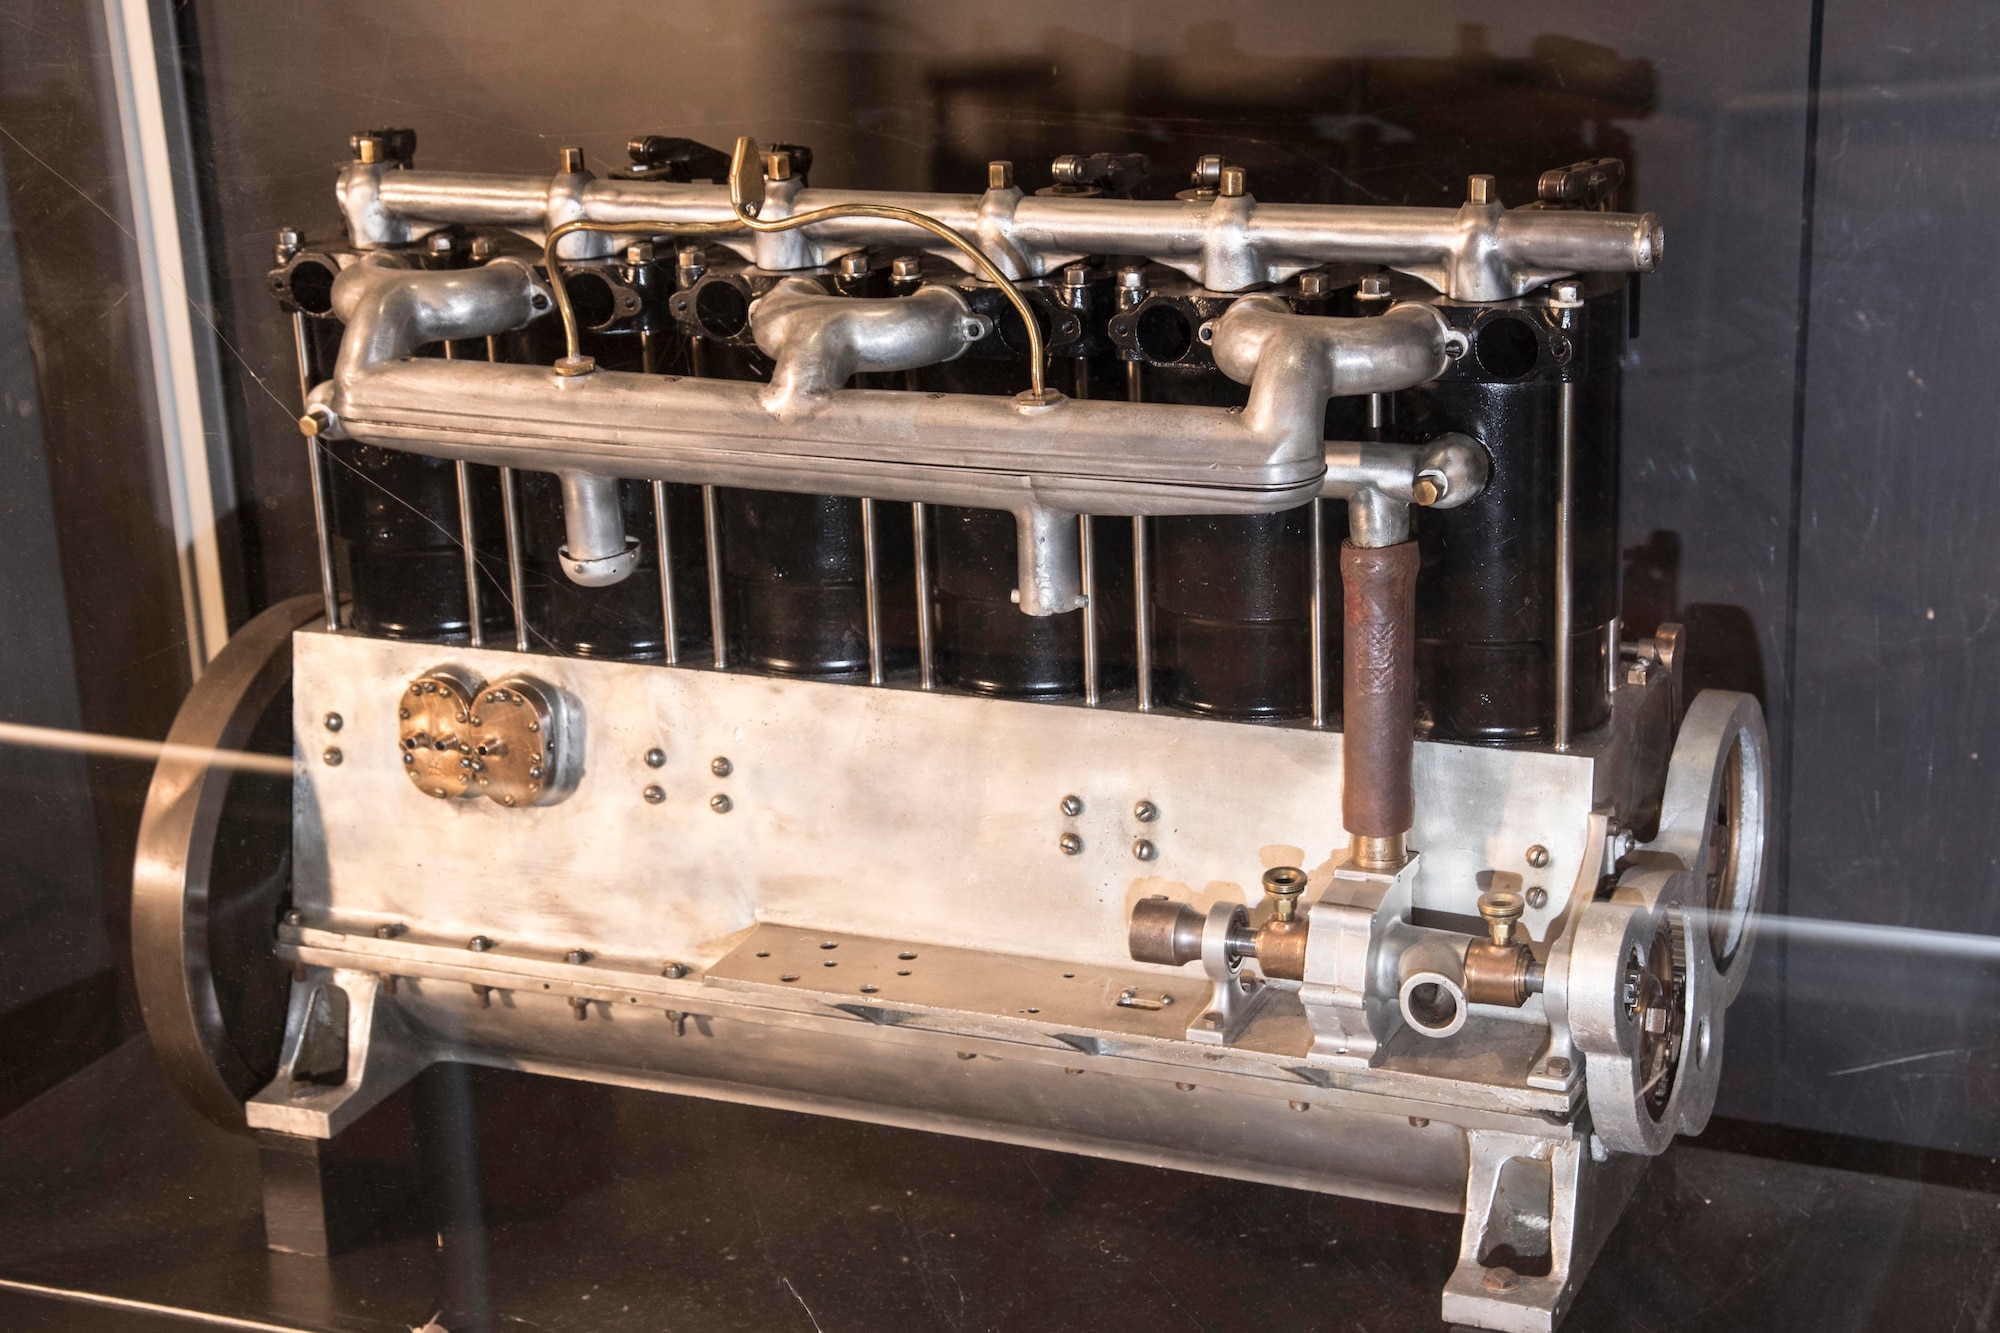 Wright 6-60 engine on display in the Early Years Gallery at the National Museum of the United States Air Force. (U.S. Air Force photo)